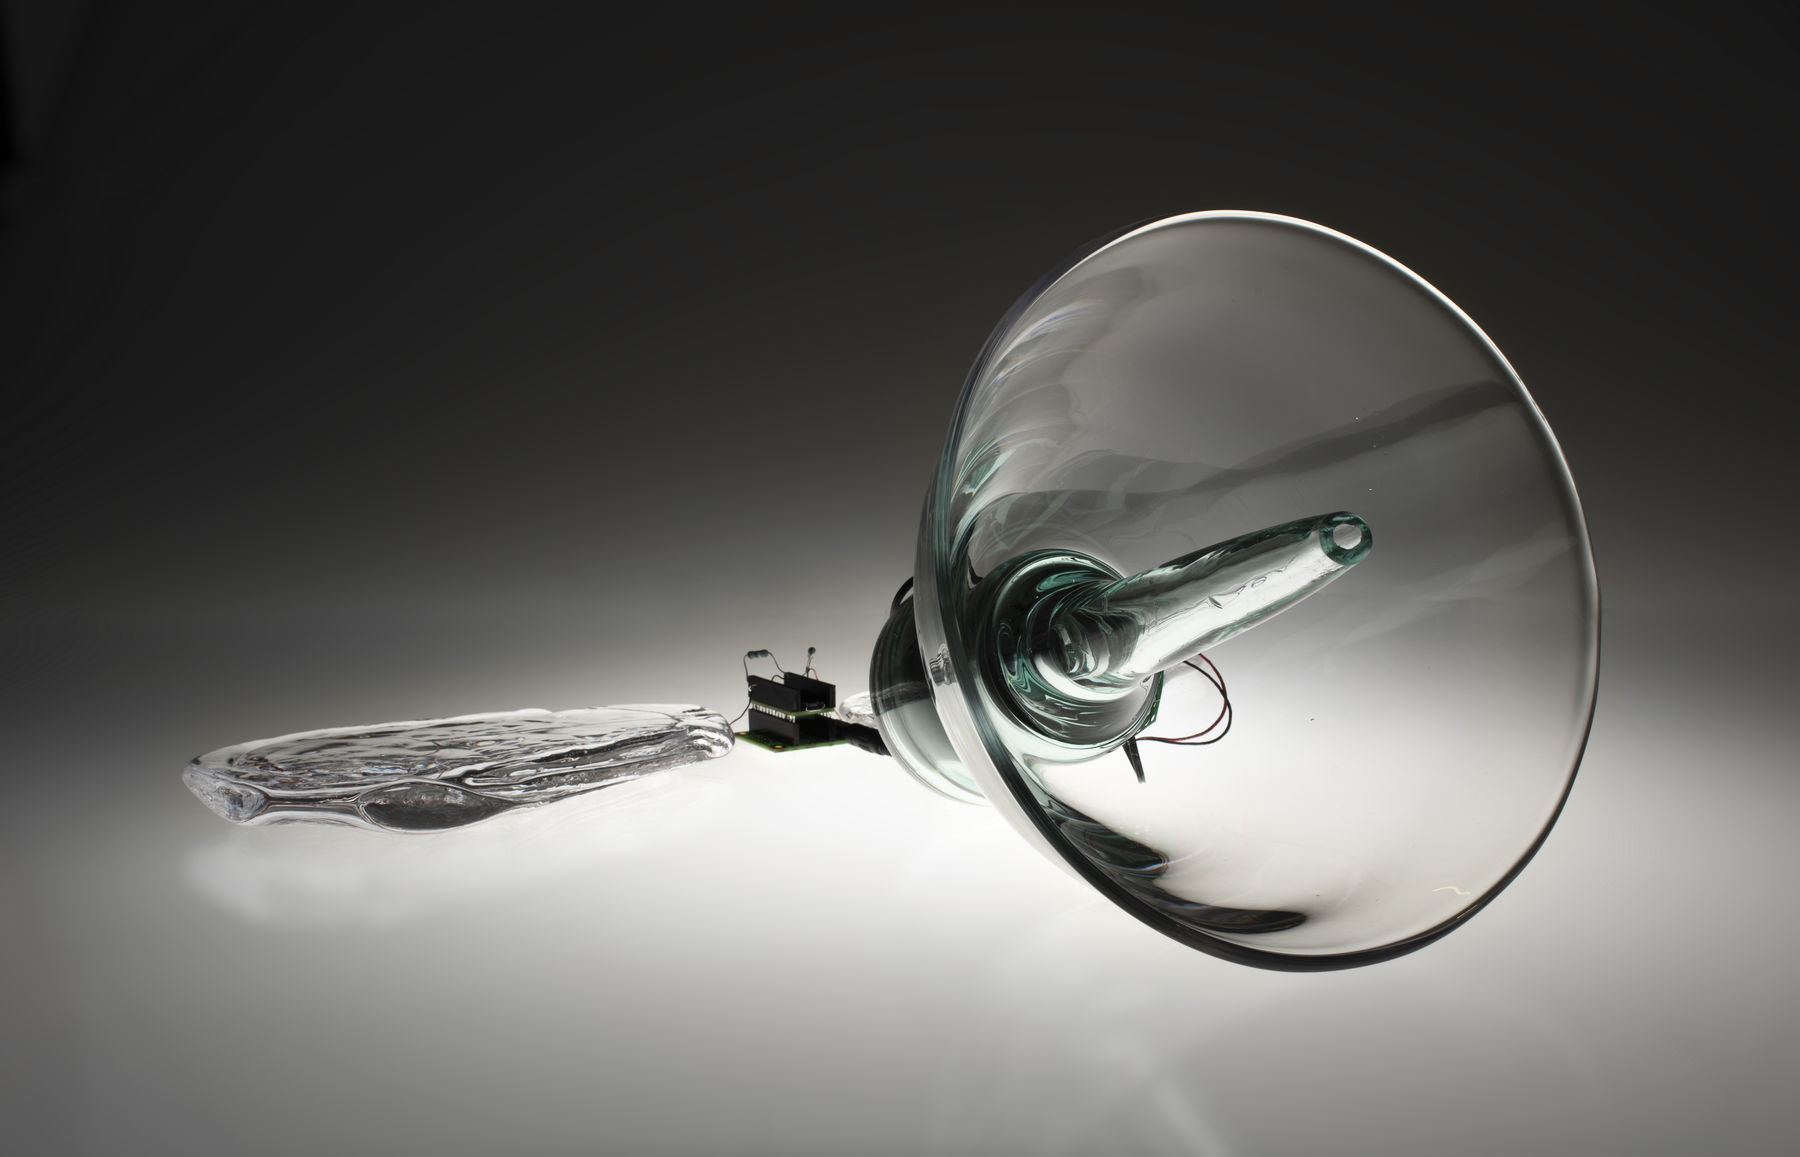 sculptural glass pieces with some electronics